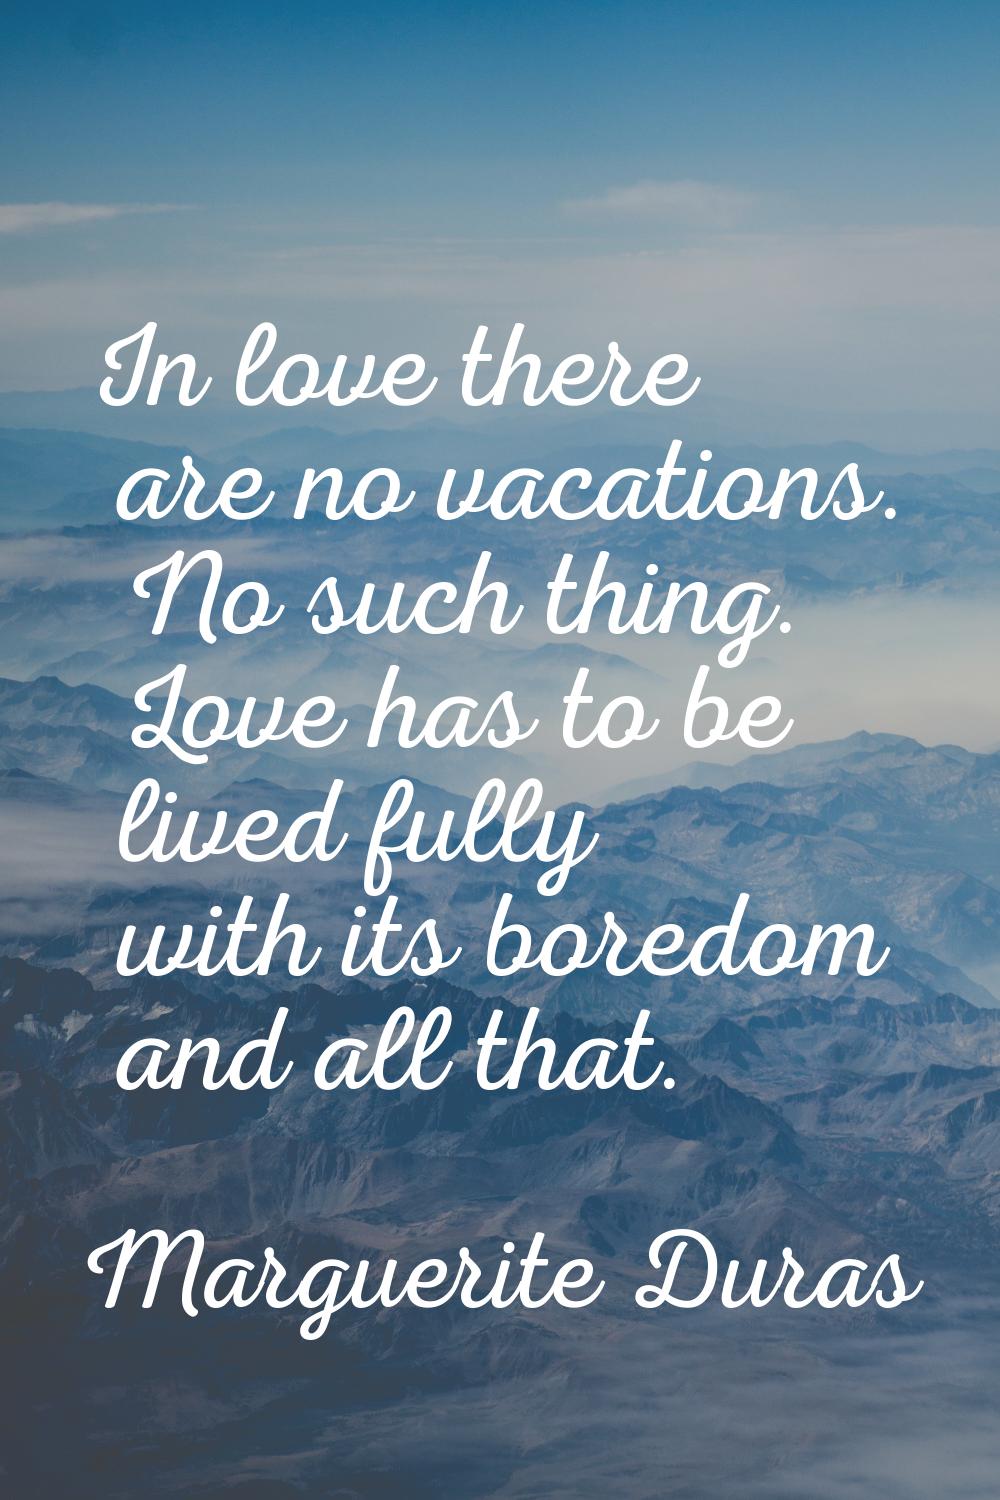 In love there are no vacations. No such thing. Love has to be lived fully with its boredom and all 